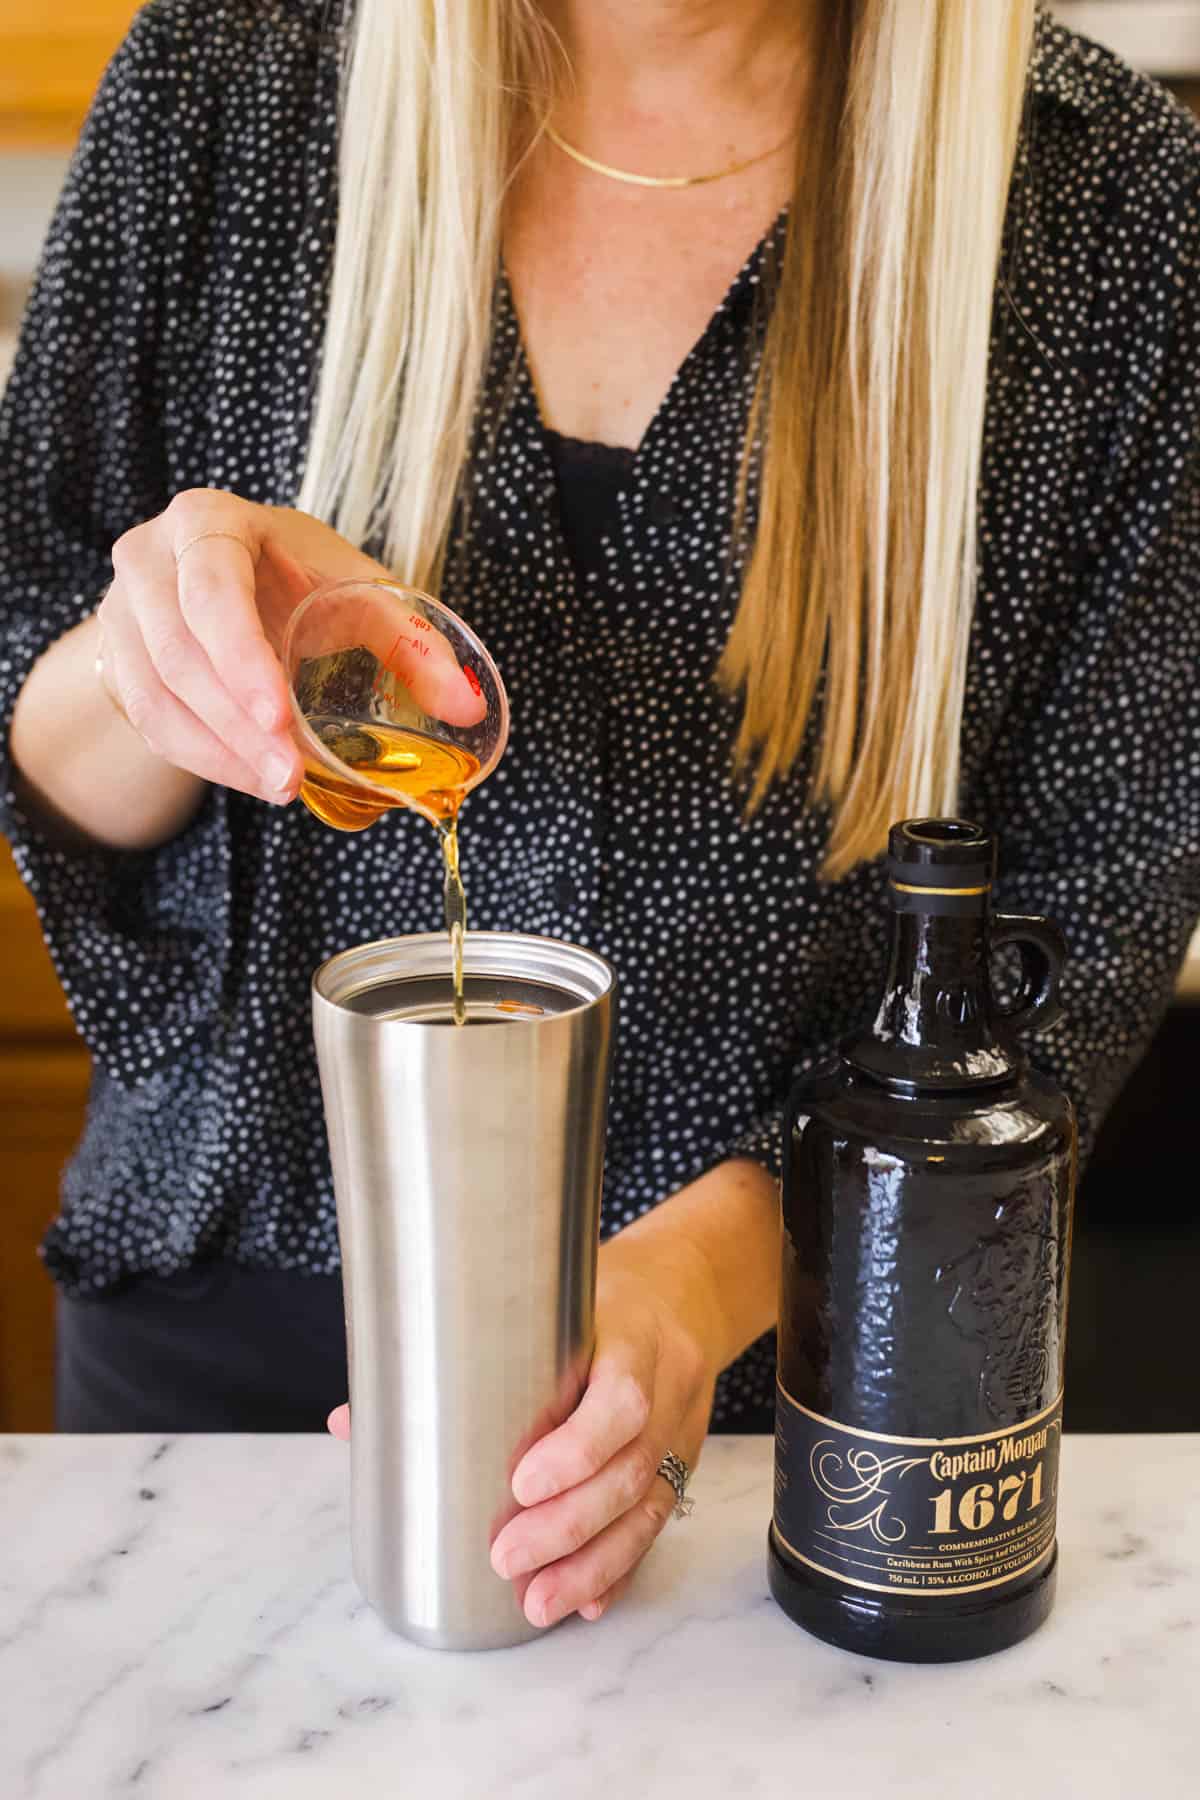 A woman pouring spiced rum into a cocktail shaker.